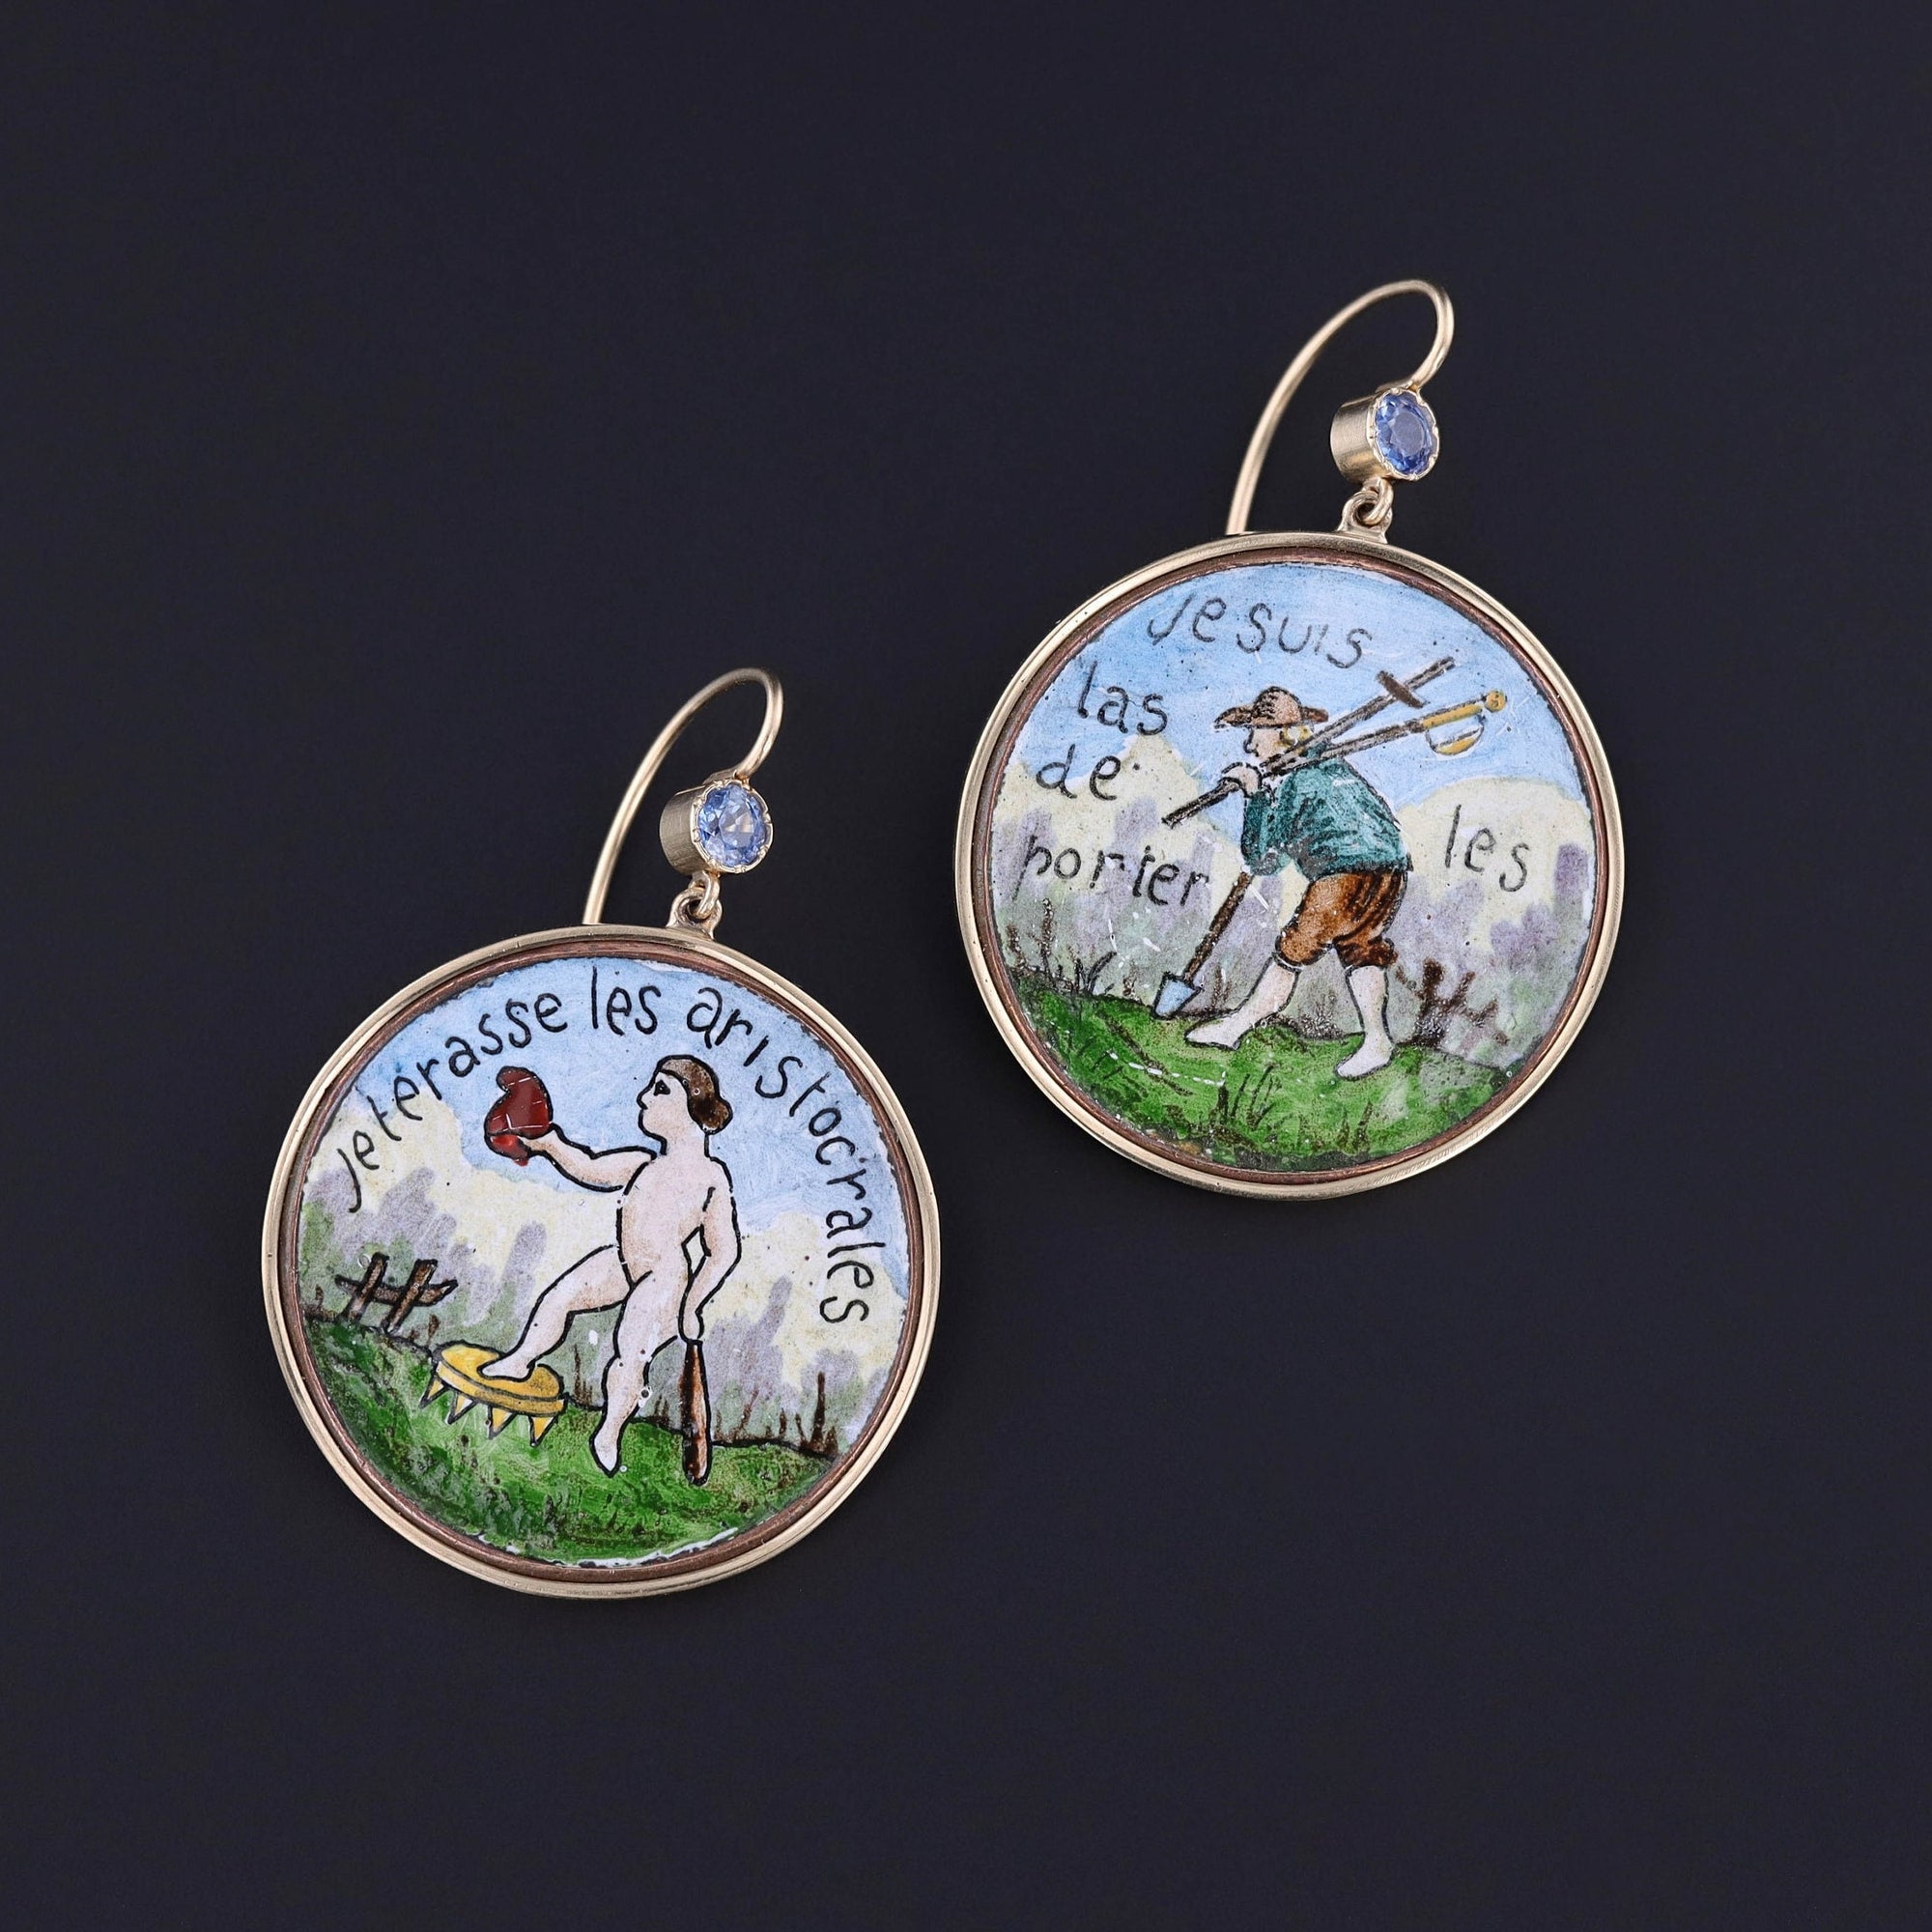 Antique French Revolution Cufflink Earrings of 14k Gold